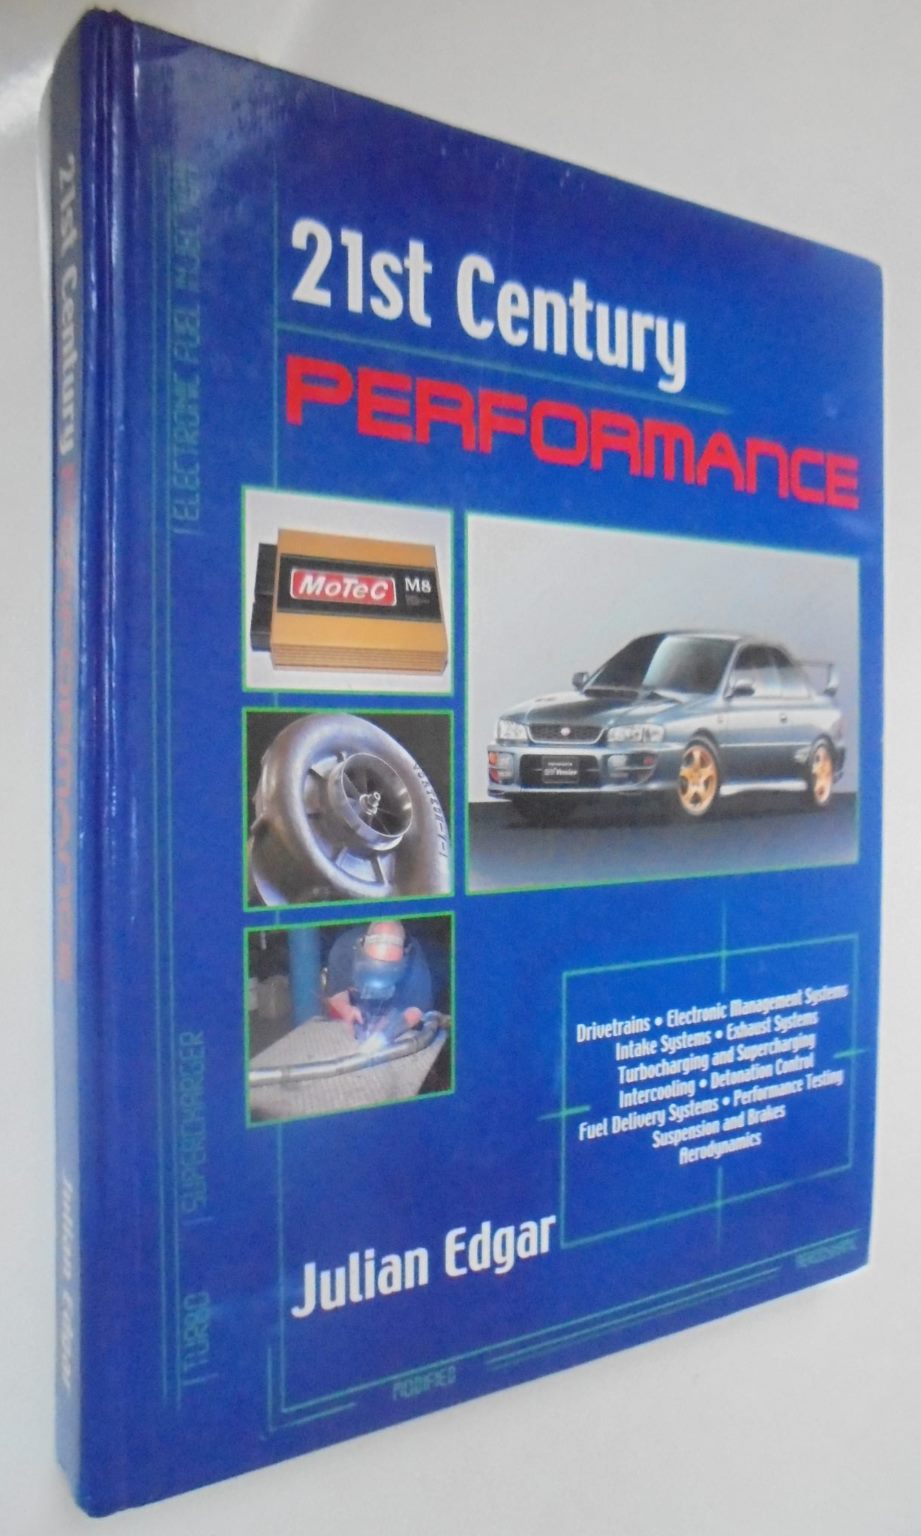 21st Century Performance - how to modify late-model cars By Julian Edgar. VERY SCARCE.